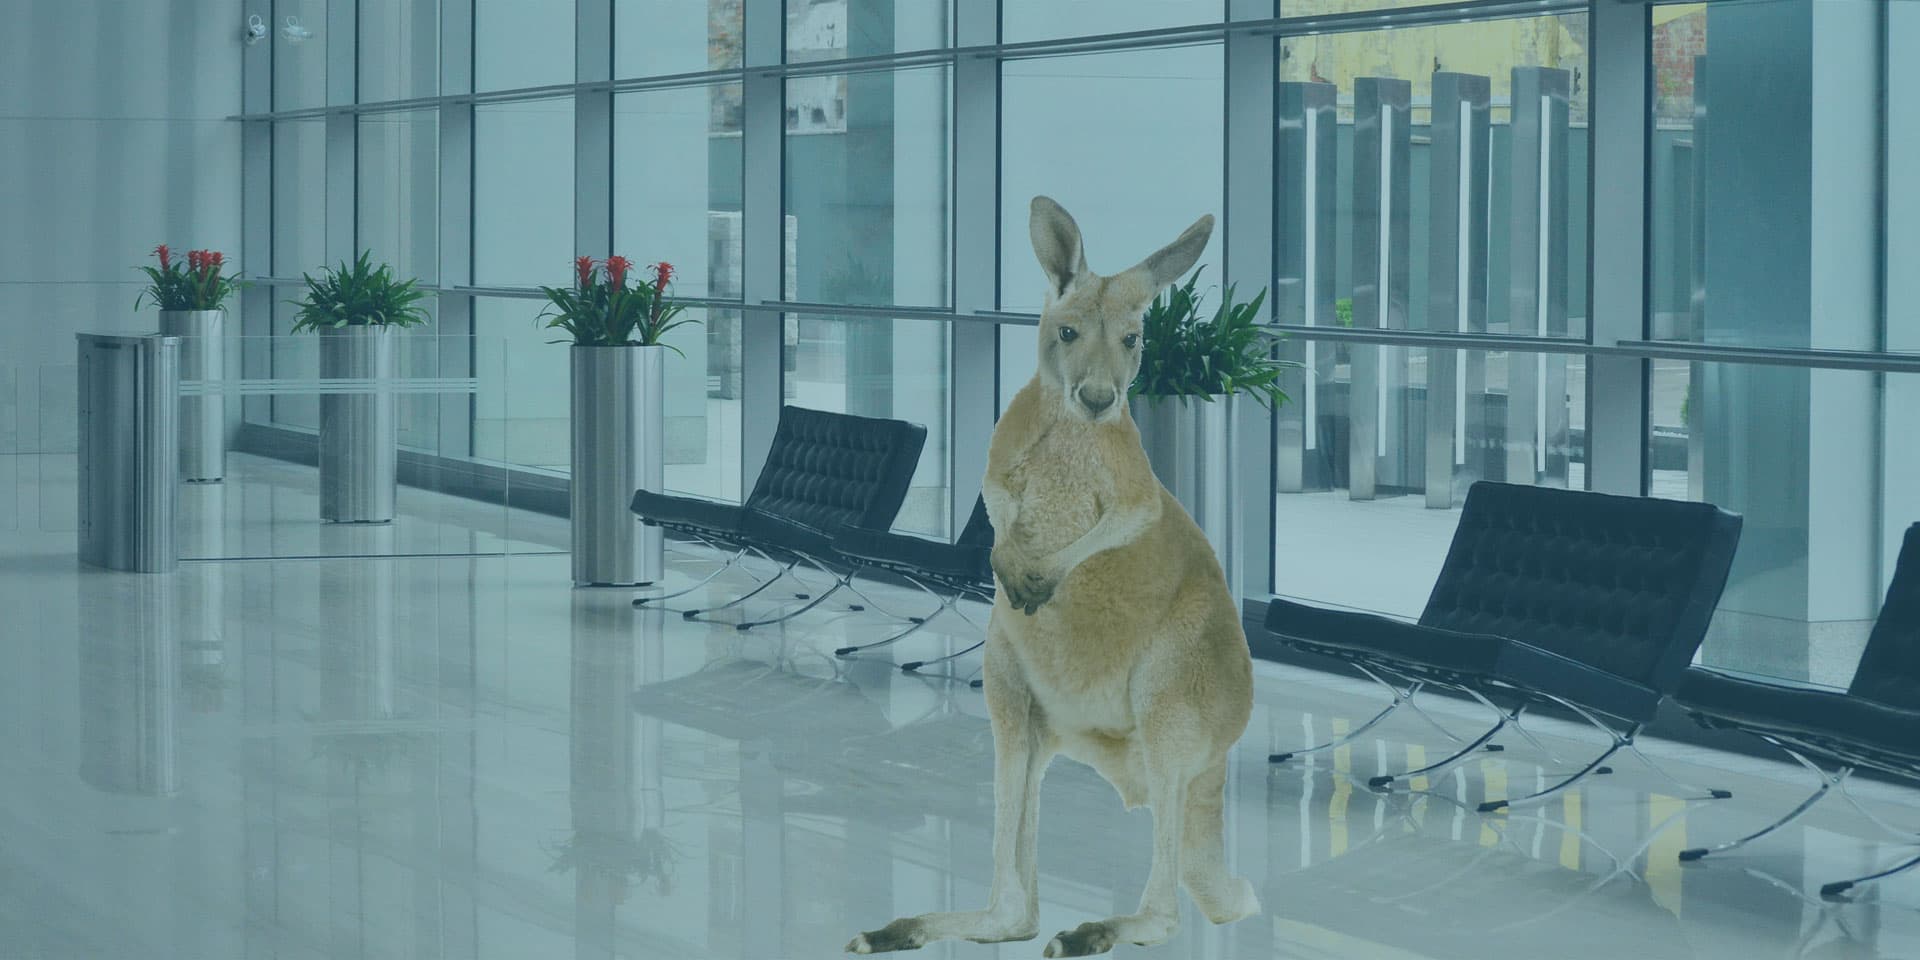 Kangaroo standing in a modern office building lobby with chairs and plants in silver cylindrical planters